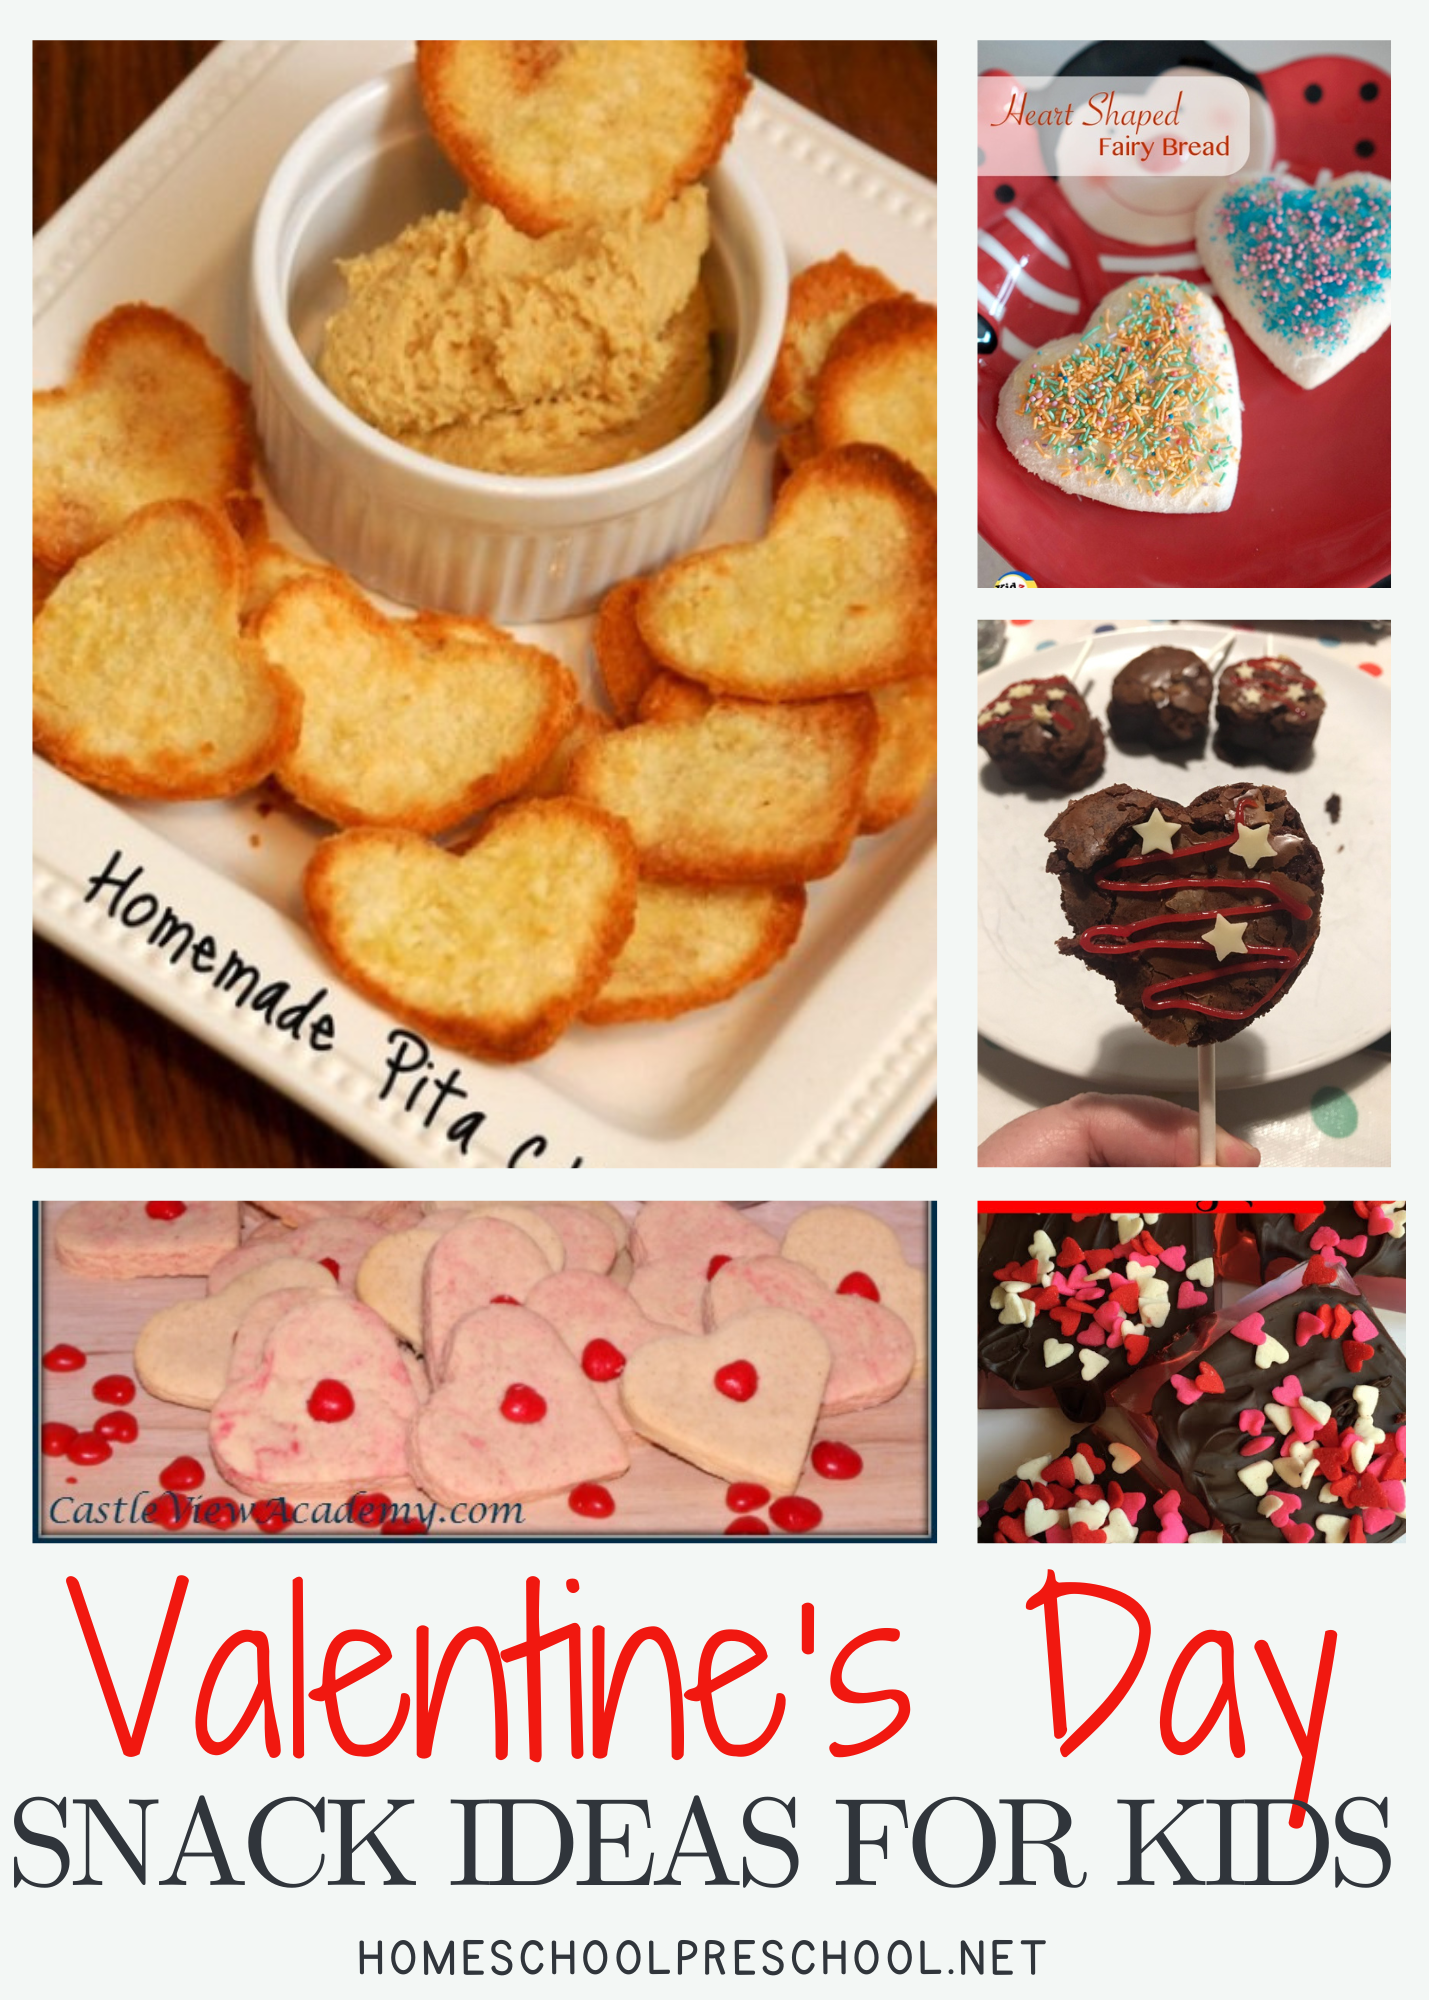 valentines-day-food-for-kids Valentines Day Snack Ideas